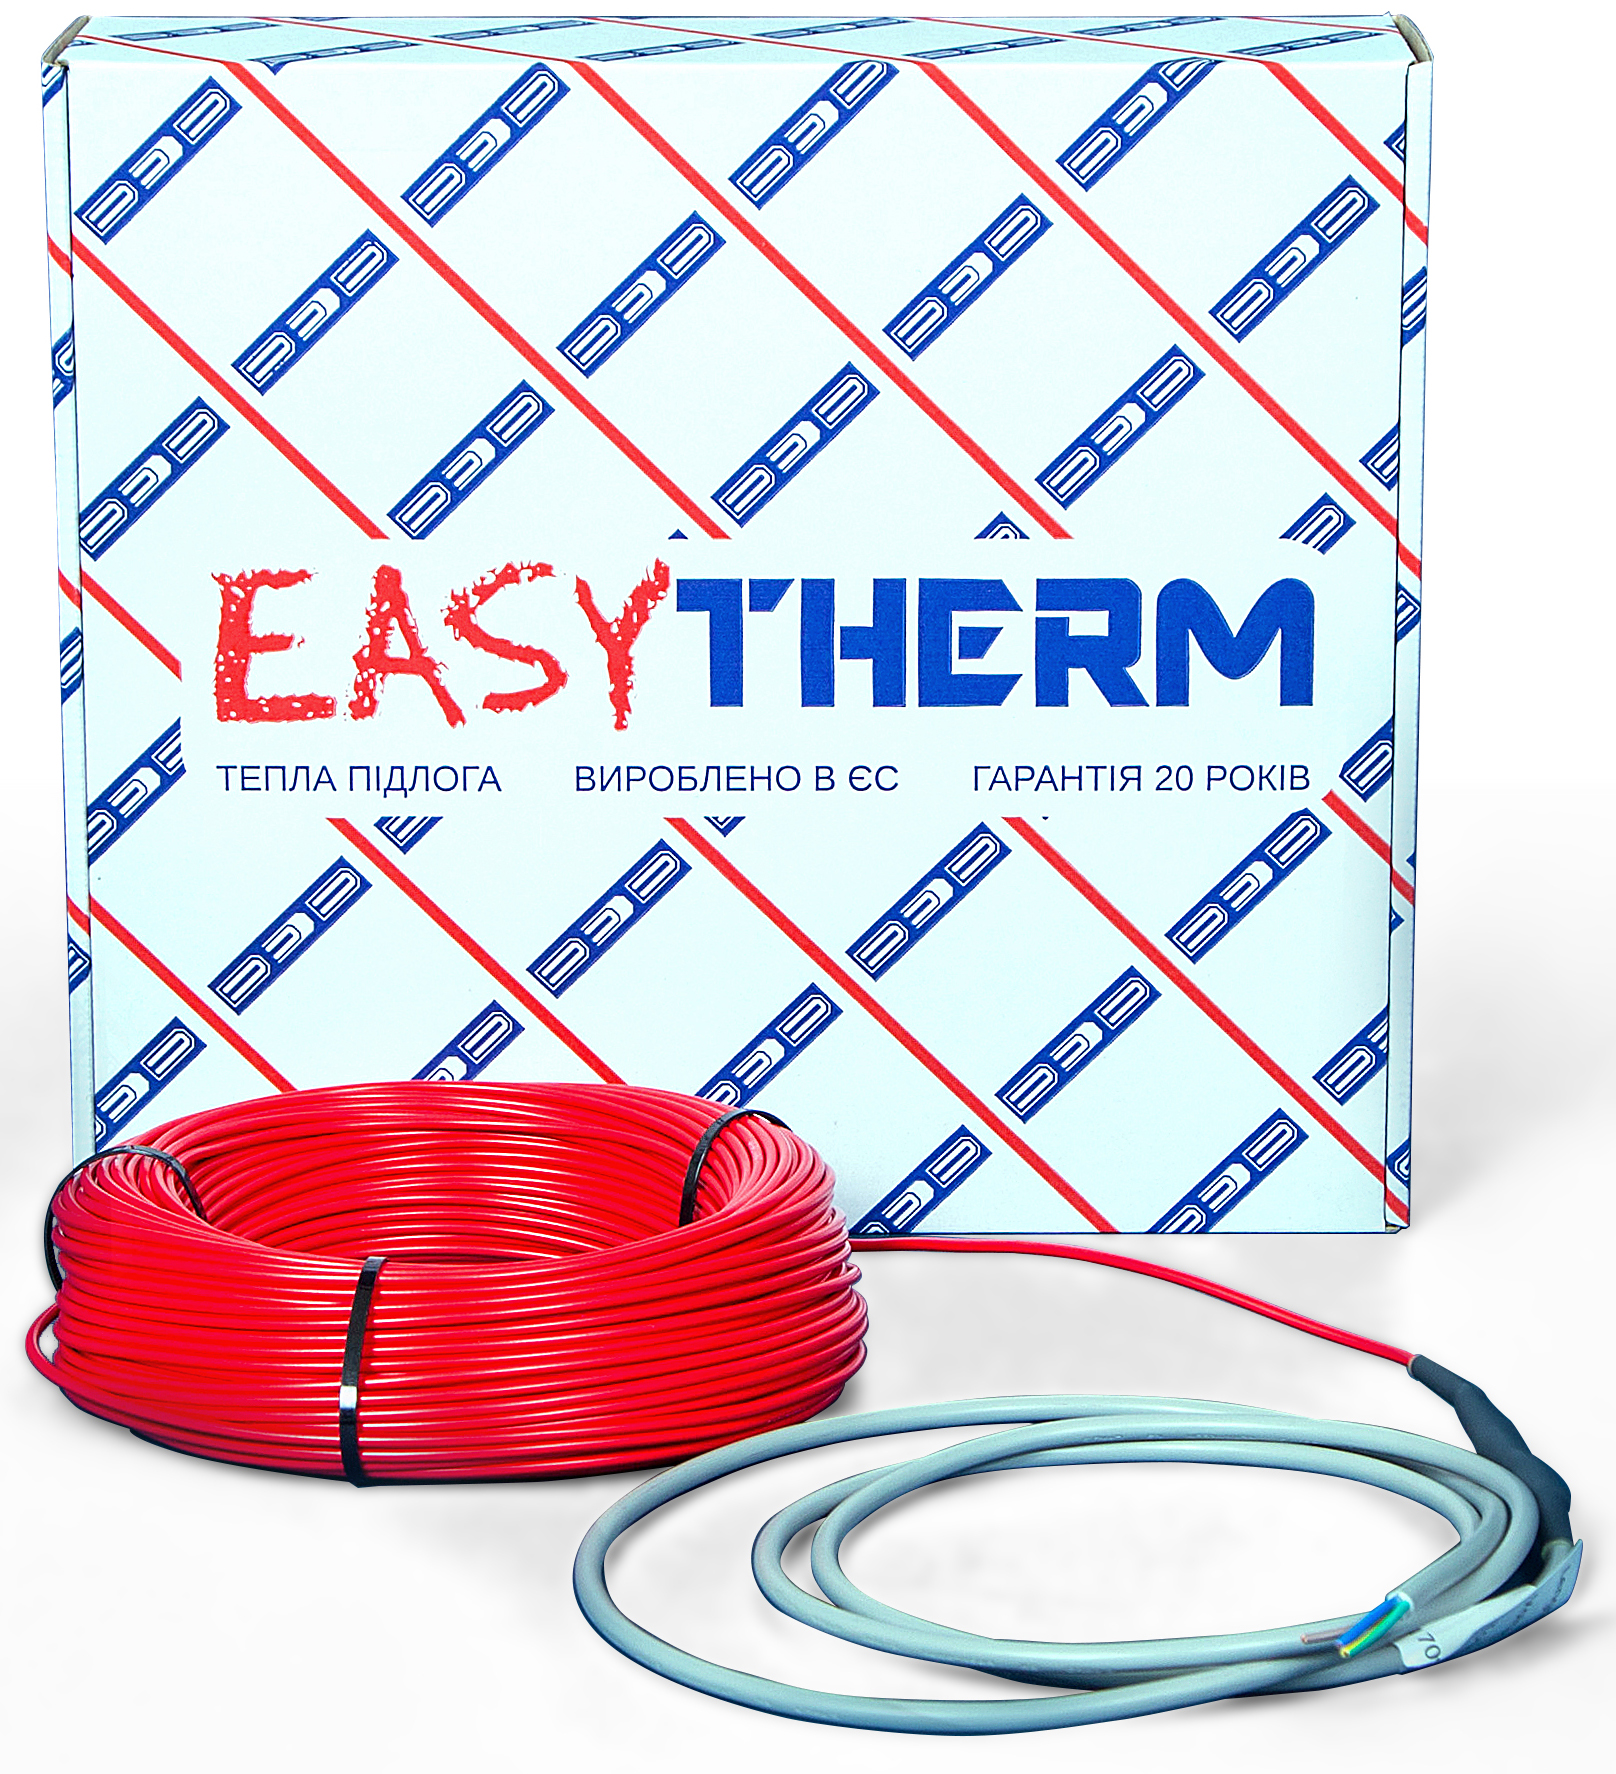 EasyTherm Easycable 11.0